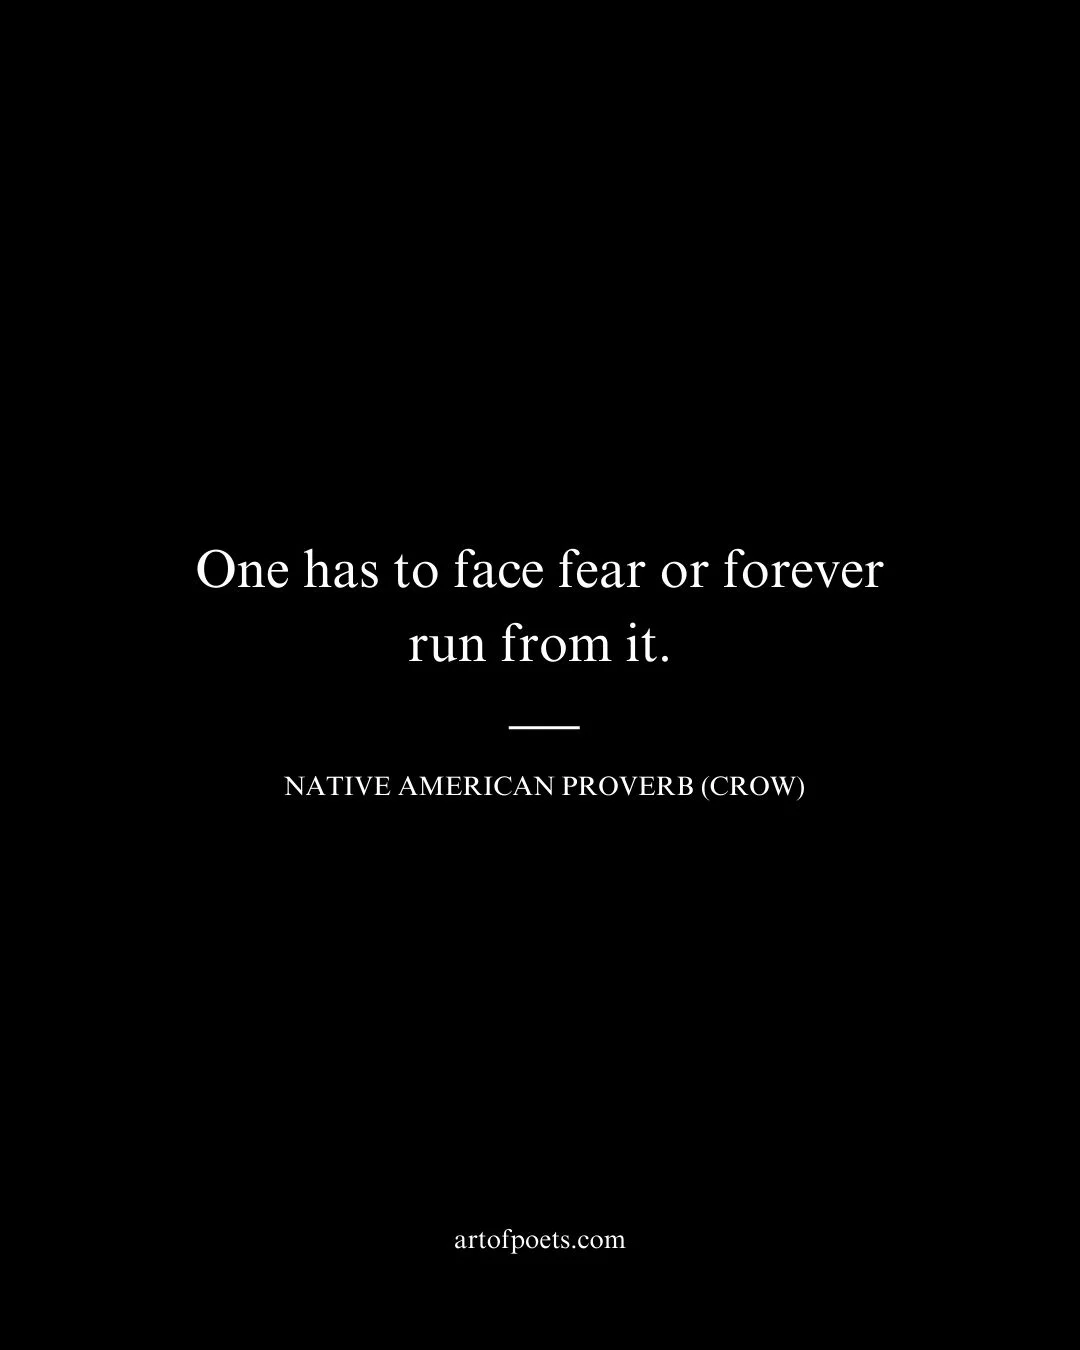 One has to face fear or forever run from it